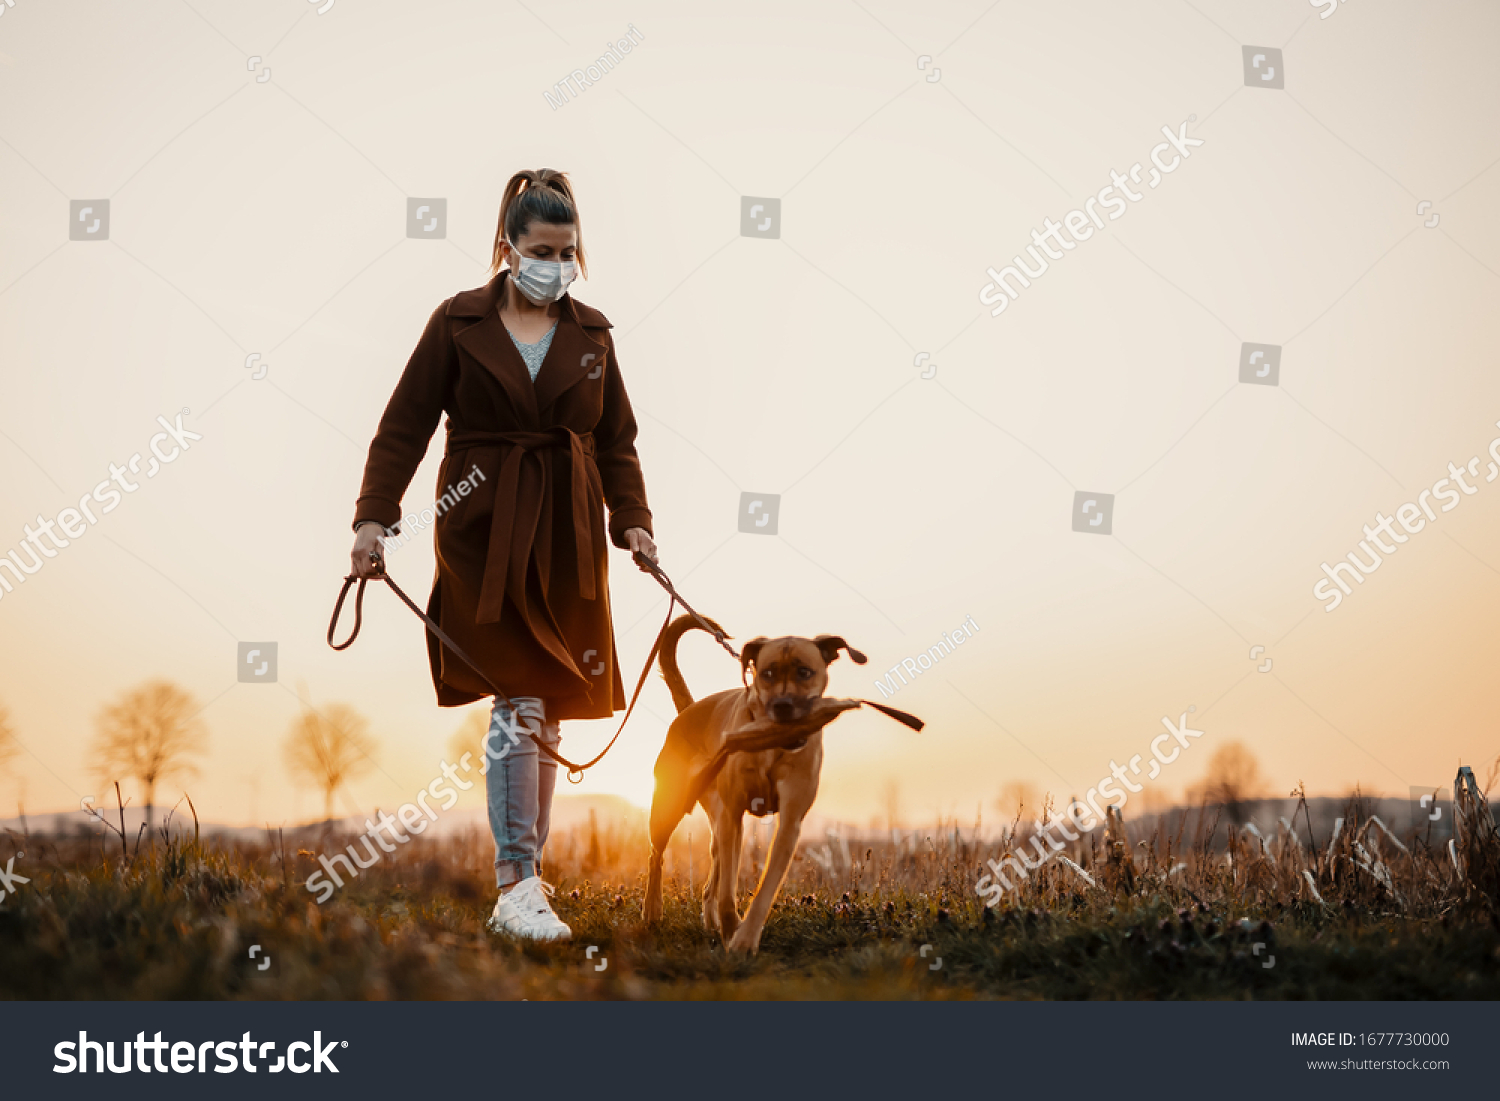 Woman wearing a protective mask is walking alone with a dog outdoors because of the corona virus pandemic covid-19 #1677730000